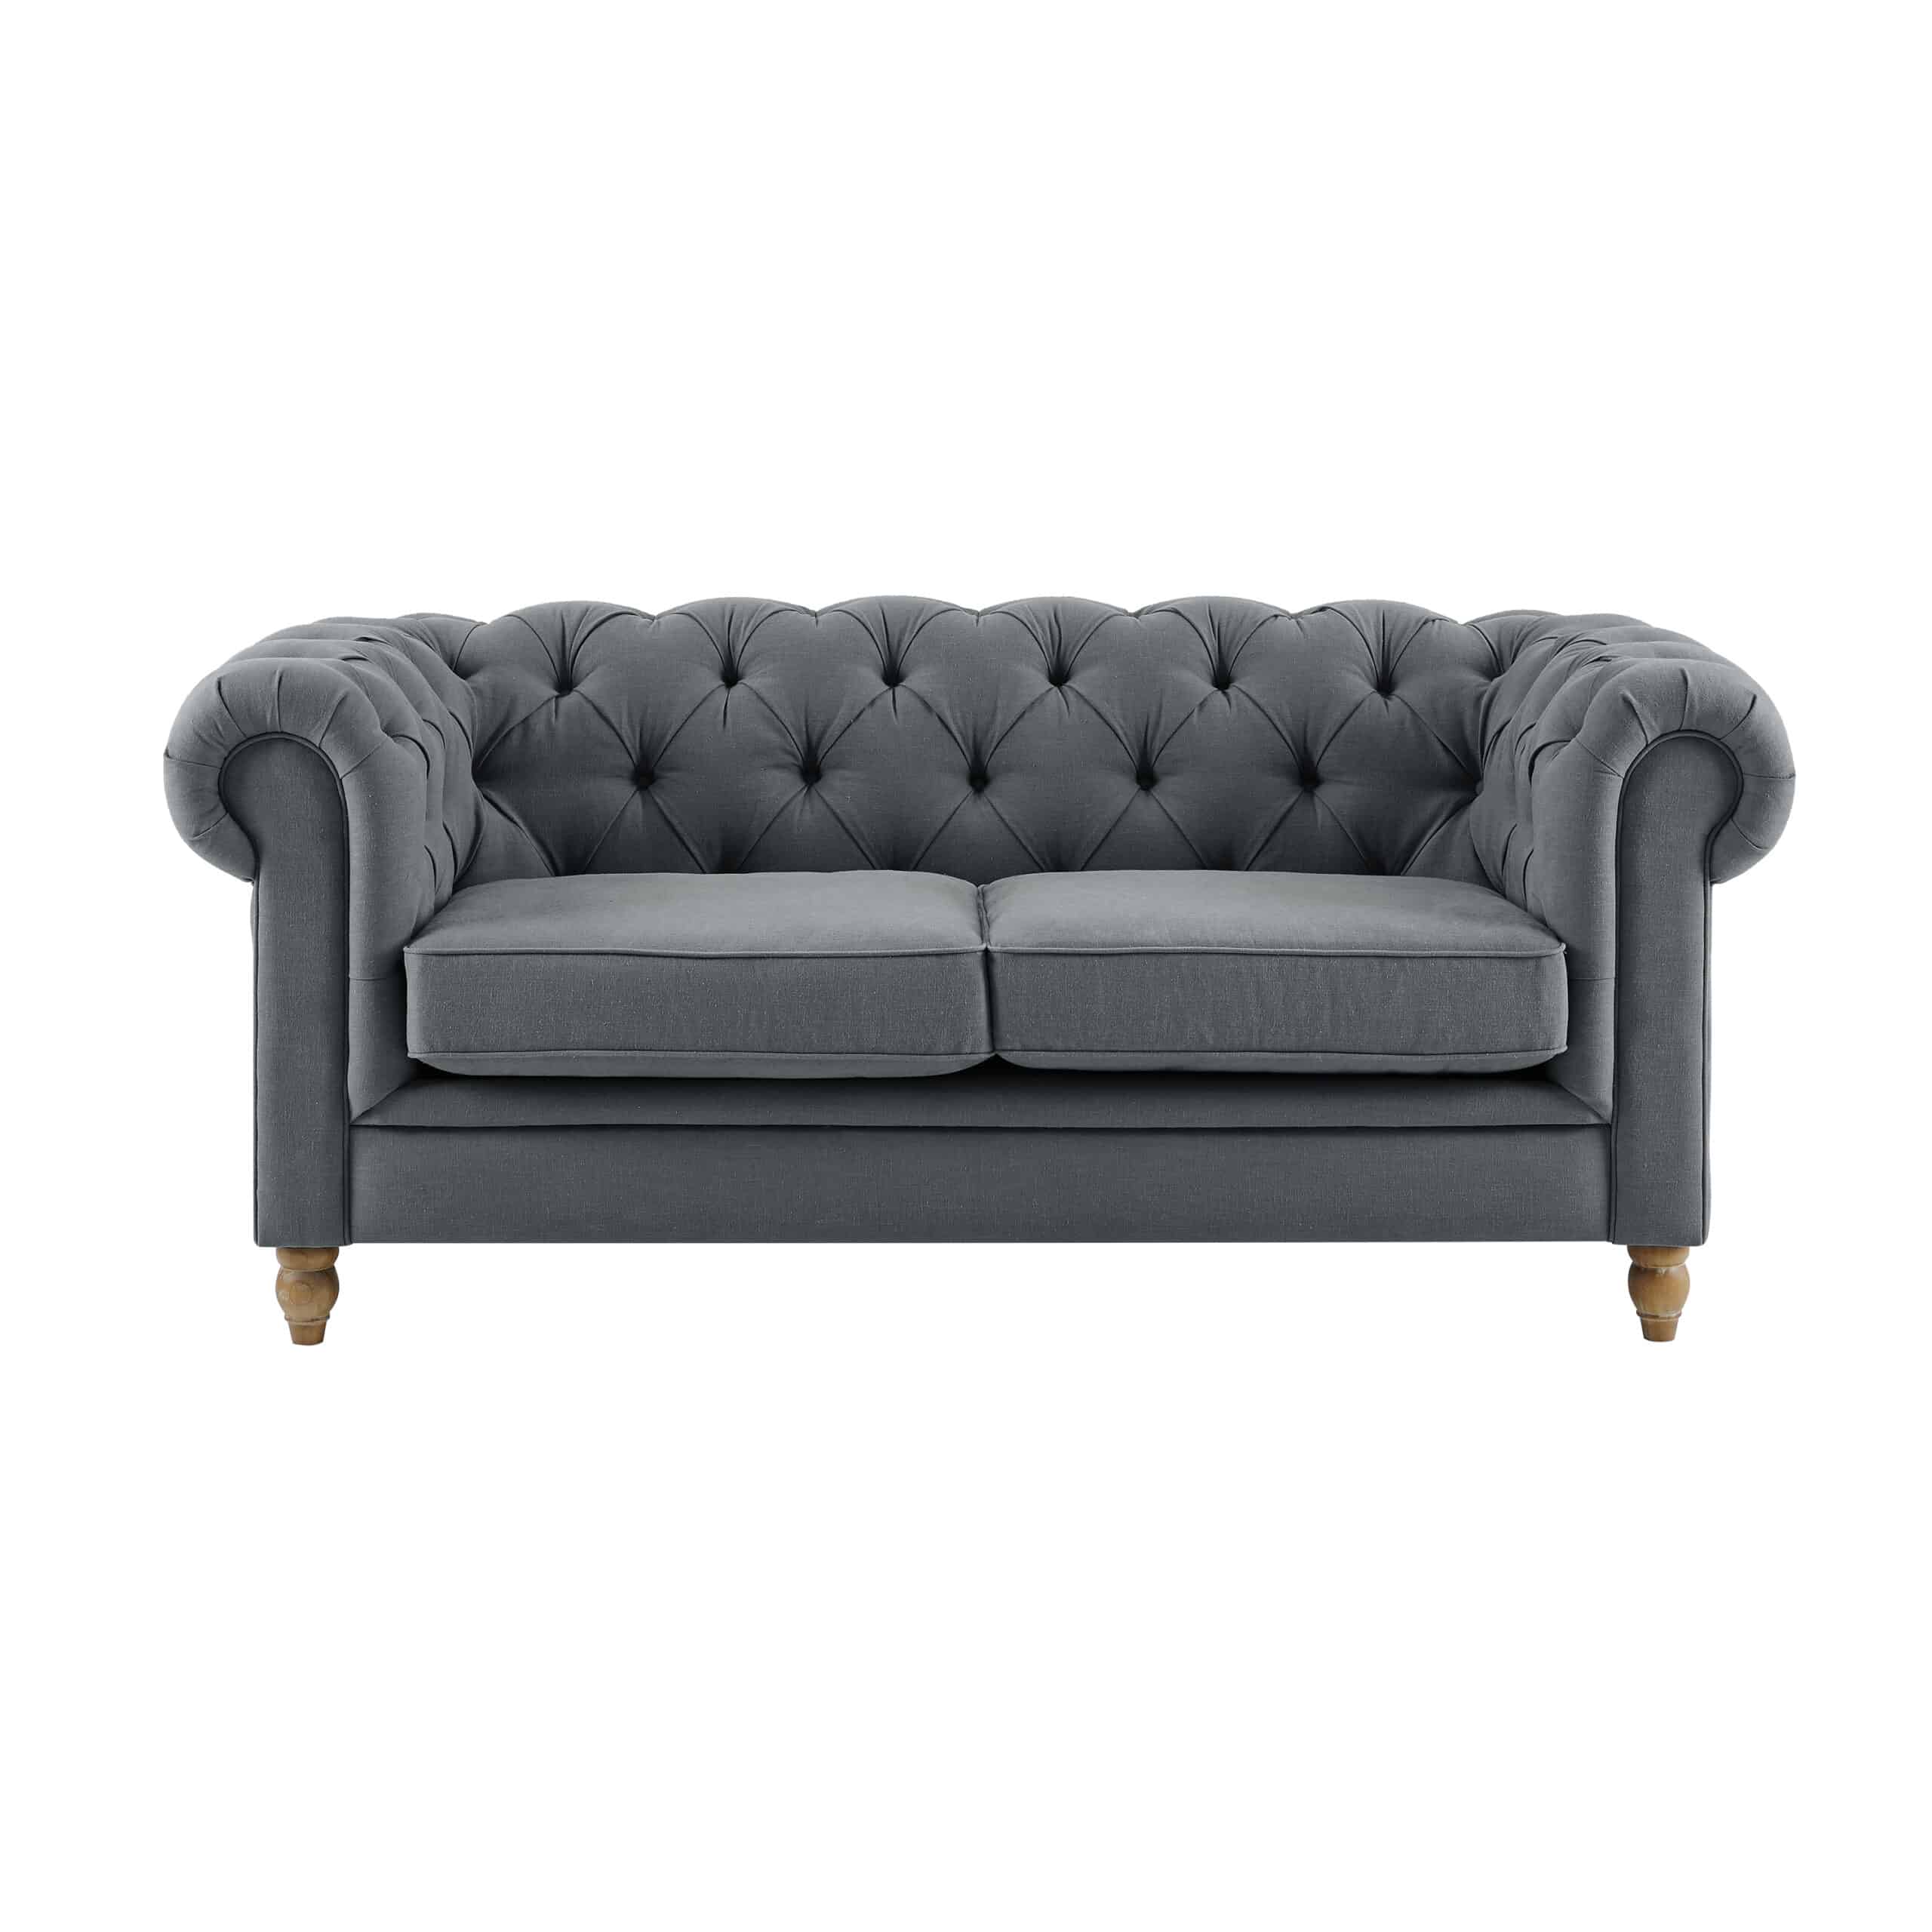 Amelia Grey Linen Two Seater Chesterfield